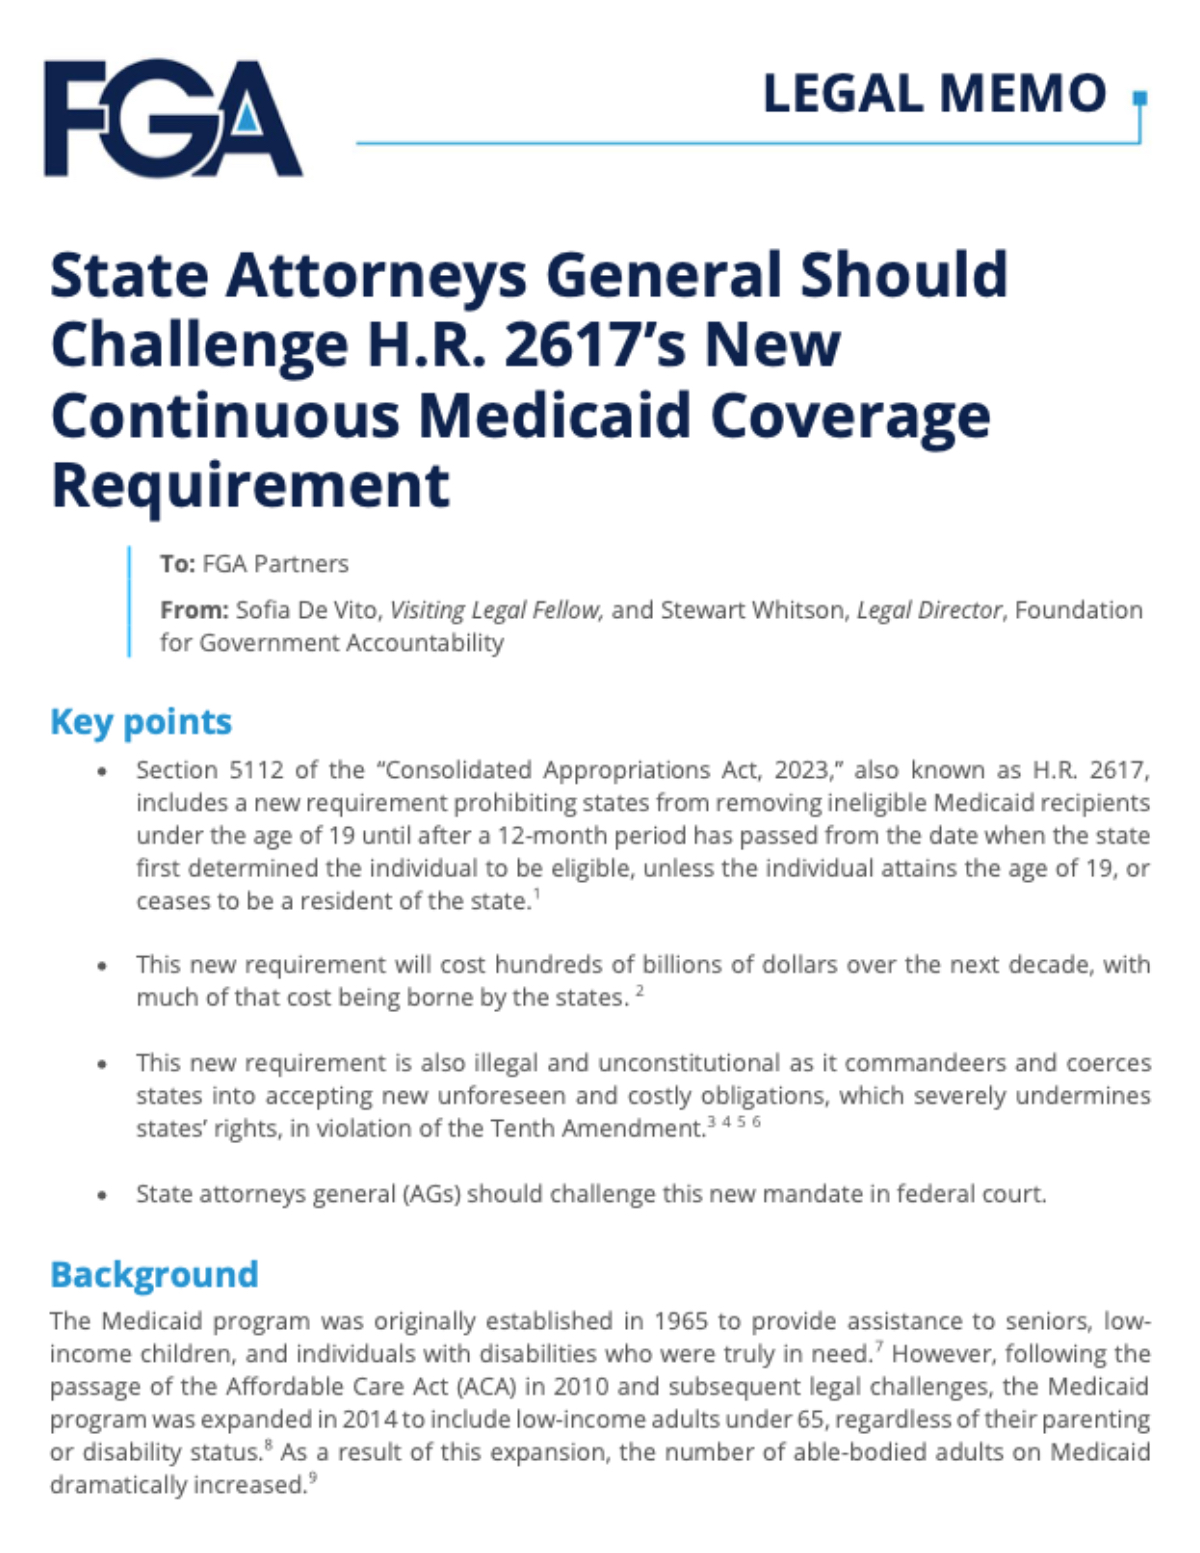 State Attorneys General Should Challenge H.R. 2617’s New Continuous Medicaid Coverage Requirement